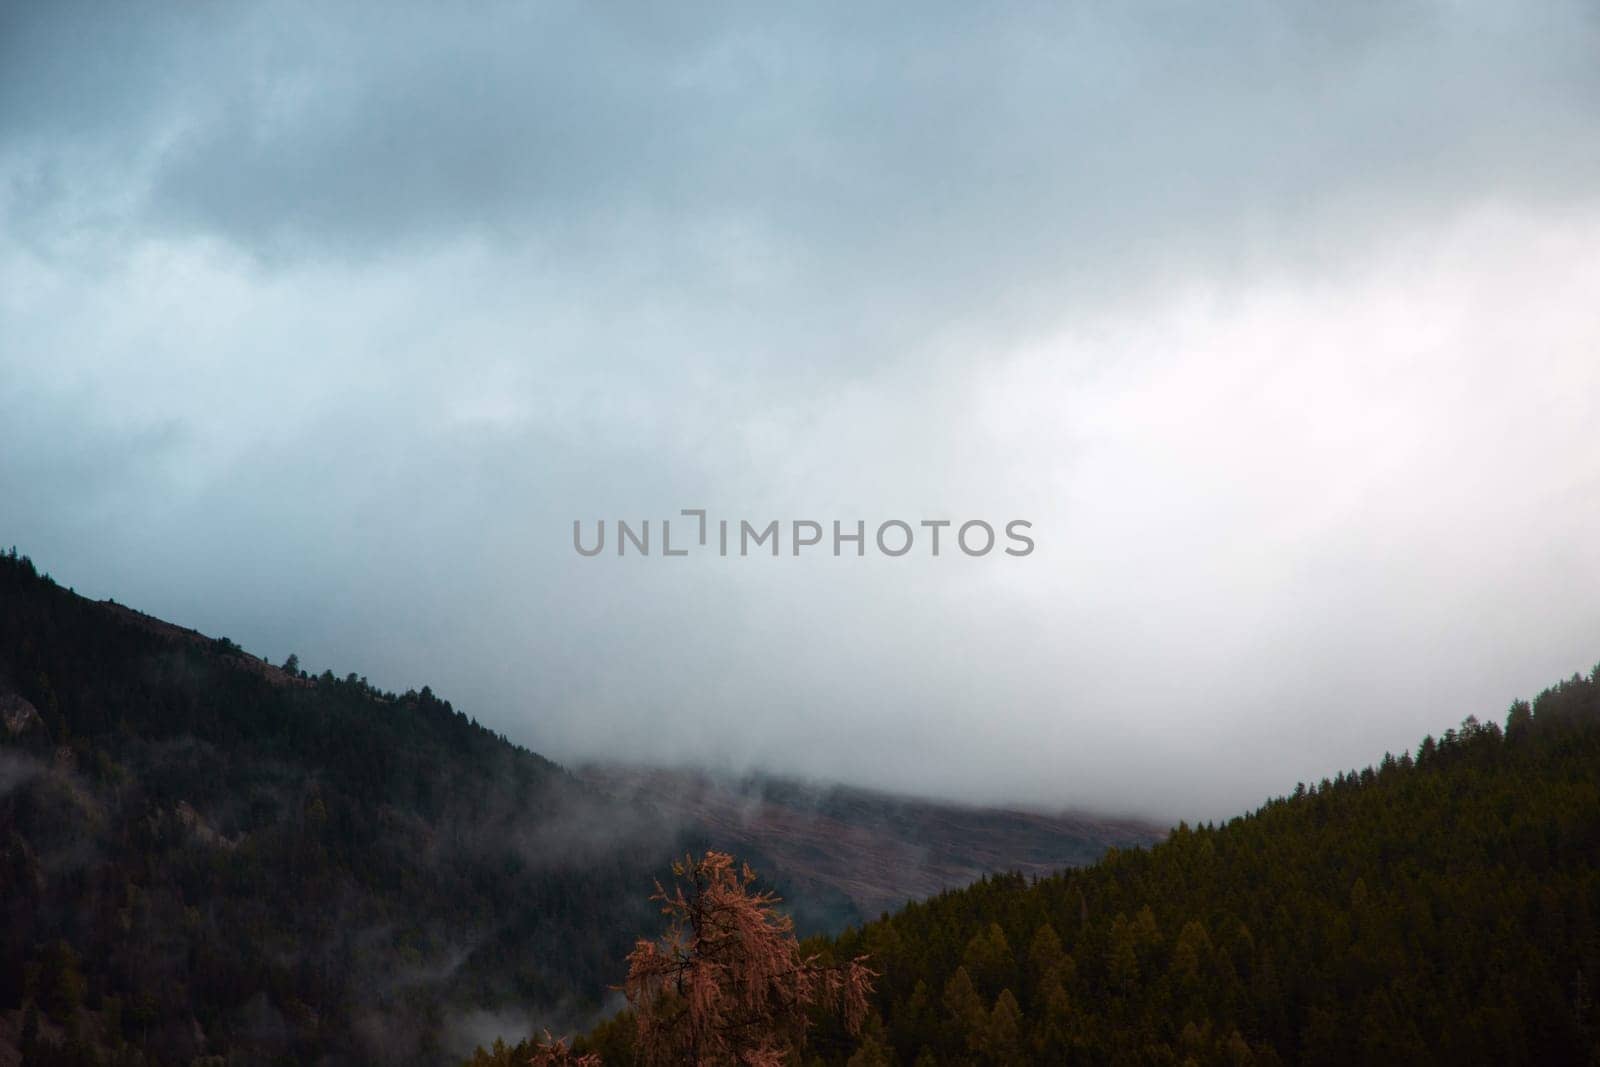 Enigmatic Twilight: Mist-Enshrouded Pines on Mountain Slopes Under a Moody Sky. High quality photo